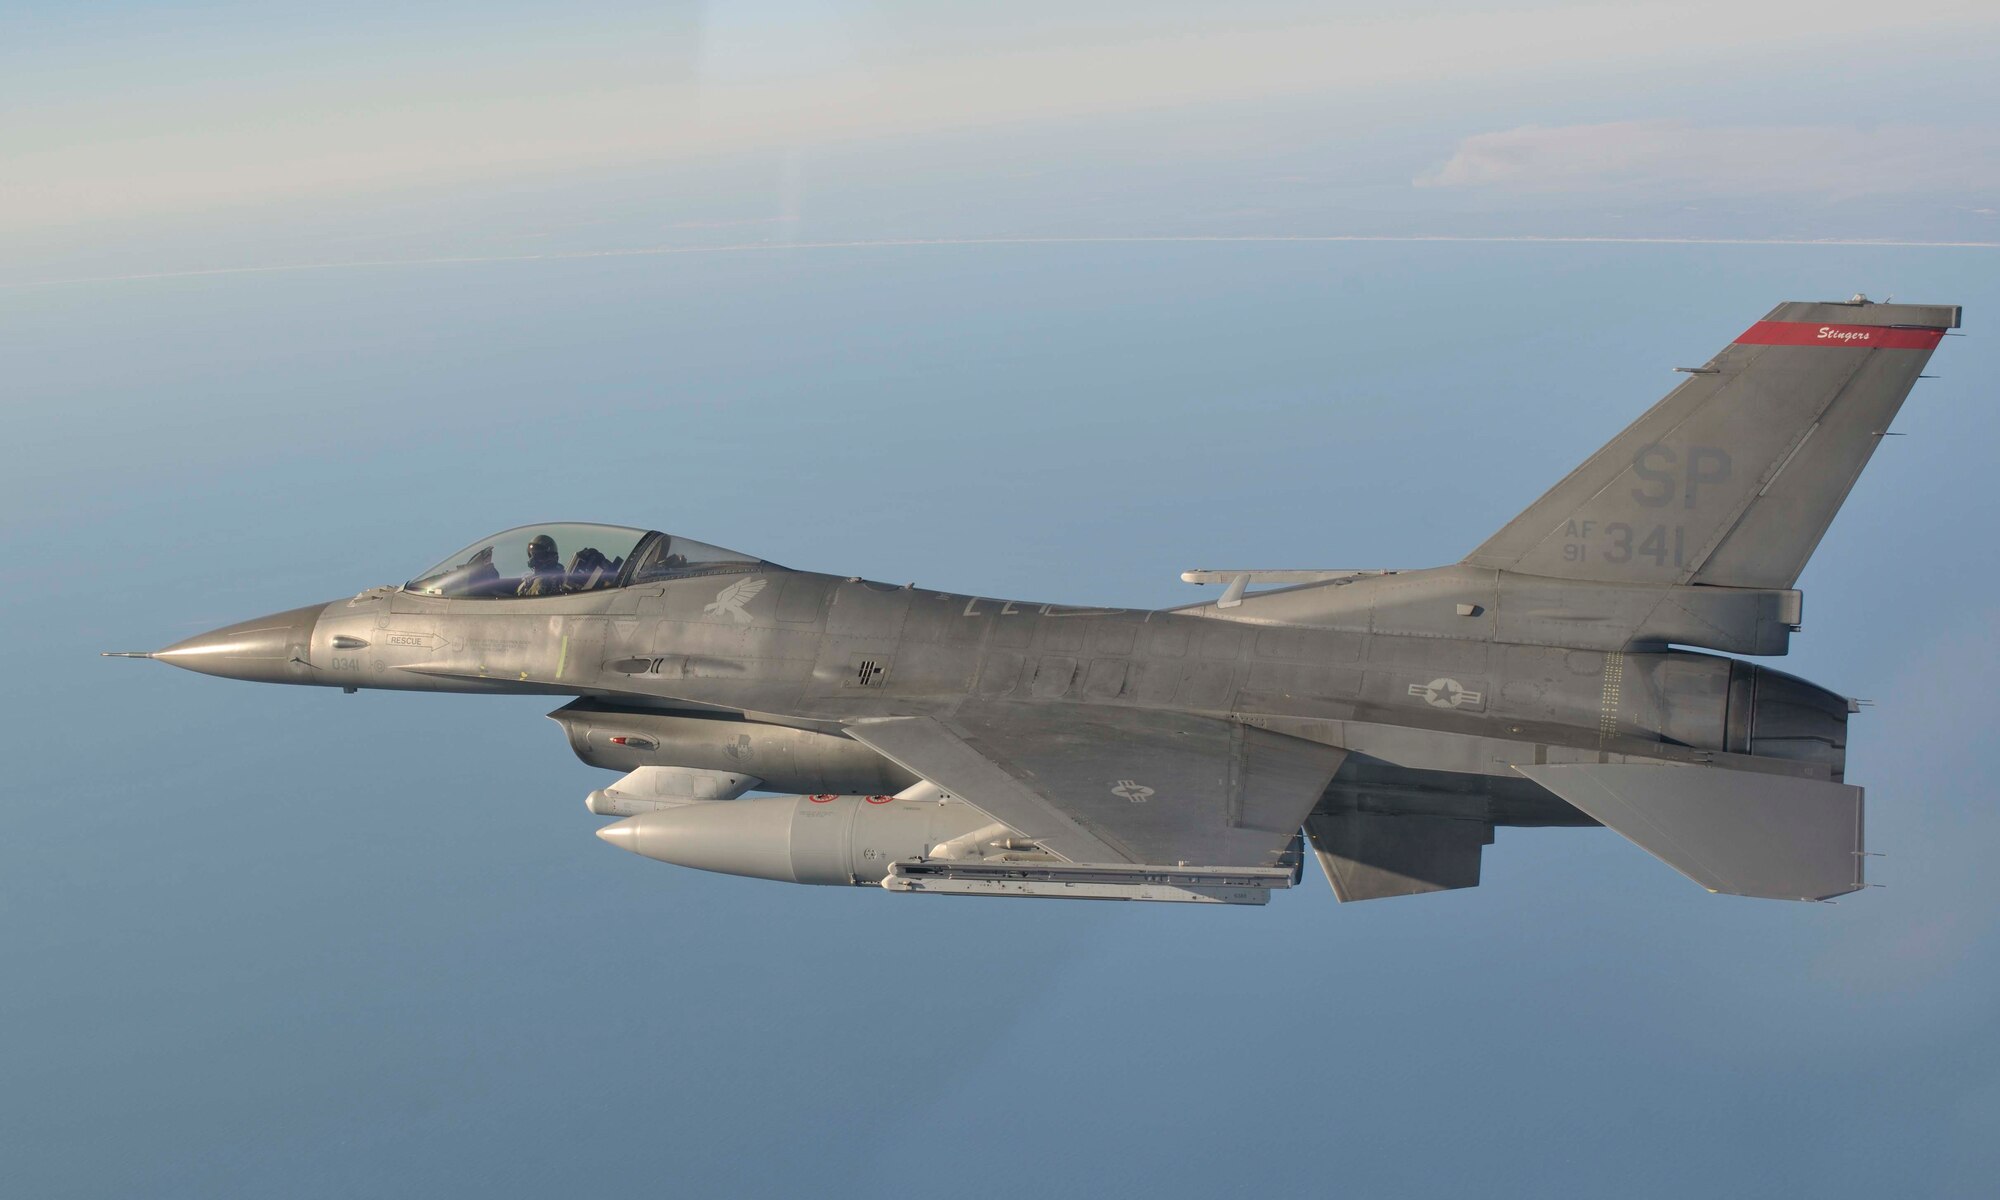 An F-16 from the 179th Fighter Squadron, a subordinate unit of the 148th Fighter Wing out of Duluth, Minn., flies a mission over the Gulf of Mexico Jan. 27. The 148th FW is working with the 53rd Weapons Evaluation Group at Tyndall Air Force Base, Fla., for two weeks to train for their Air Sovereignty Alert missions and to validate their new Block 50 F-16s. (U.S. Air Force photo by 1st Lt. Christopher Hoskins) 